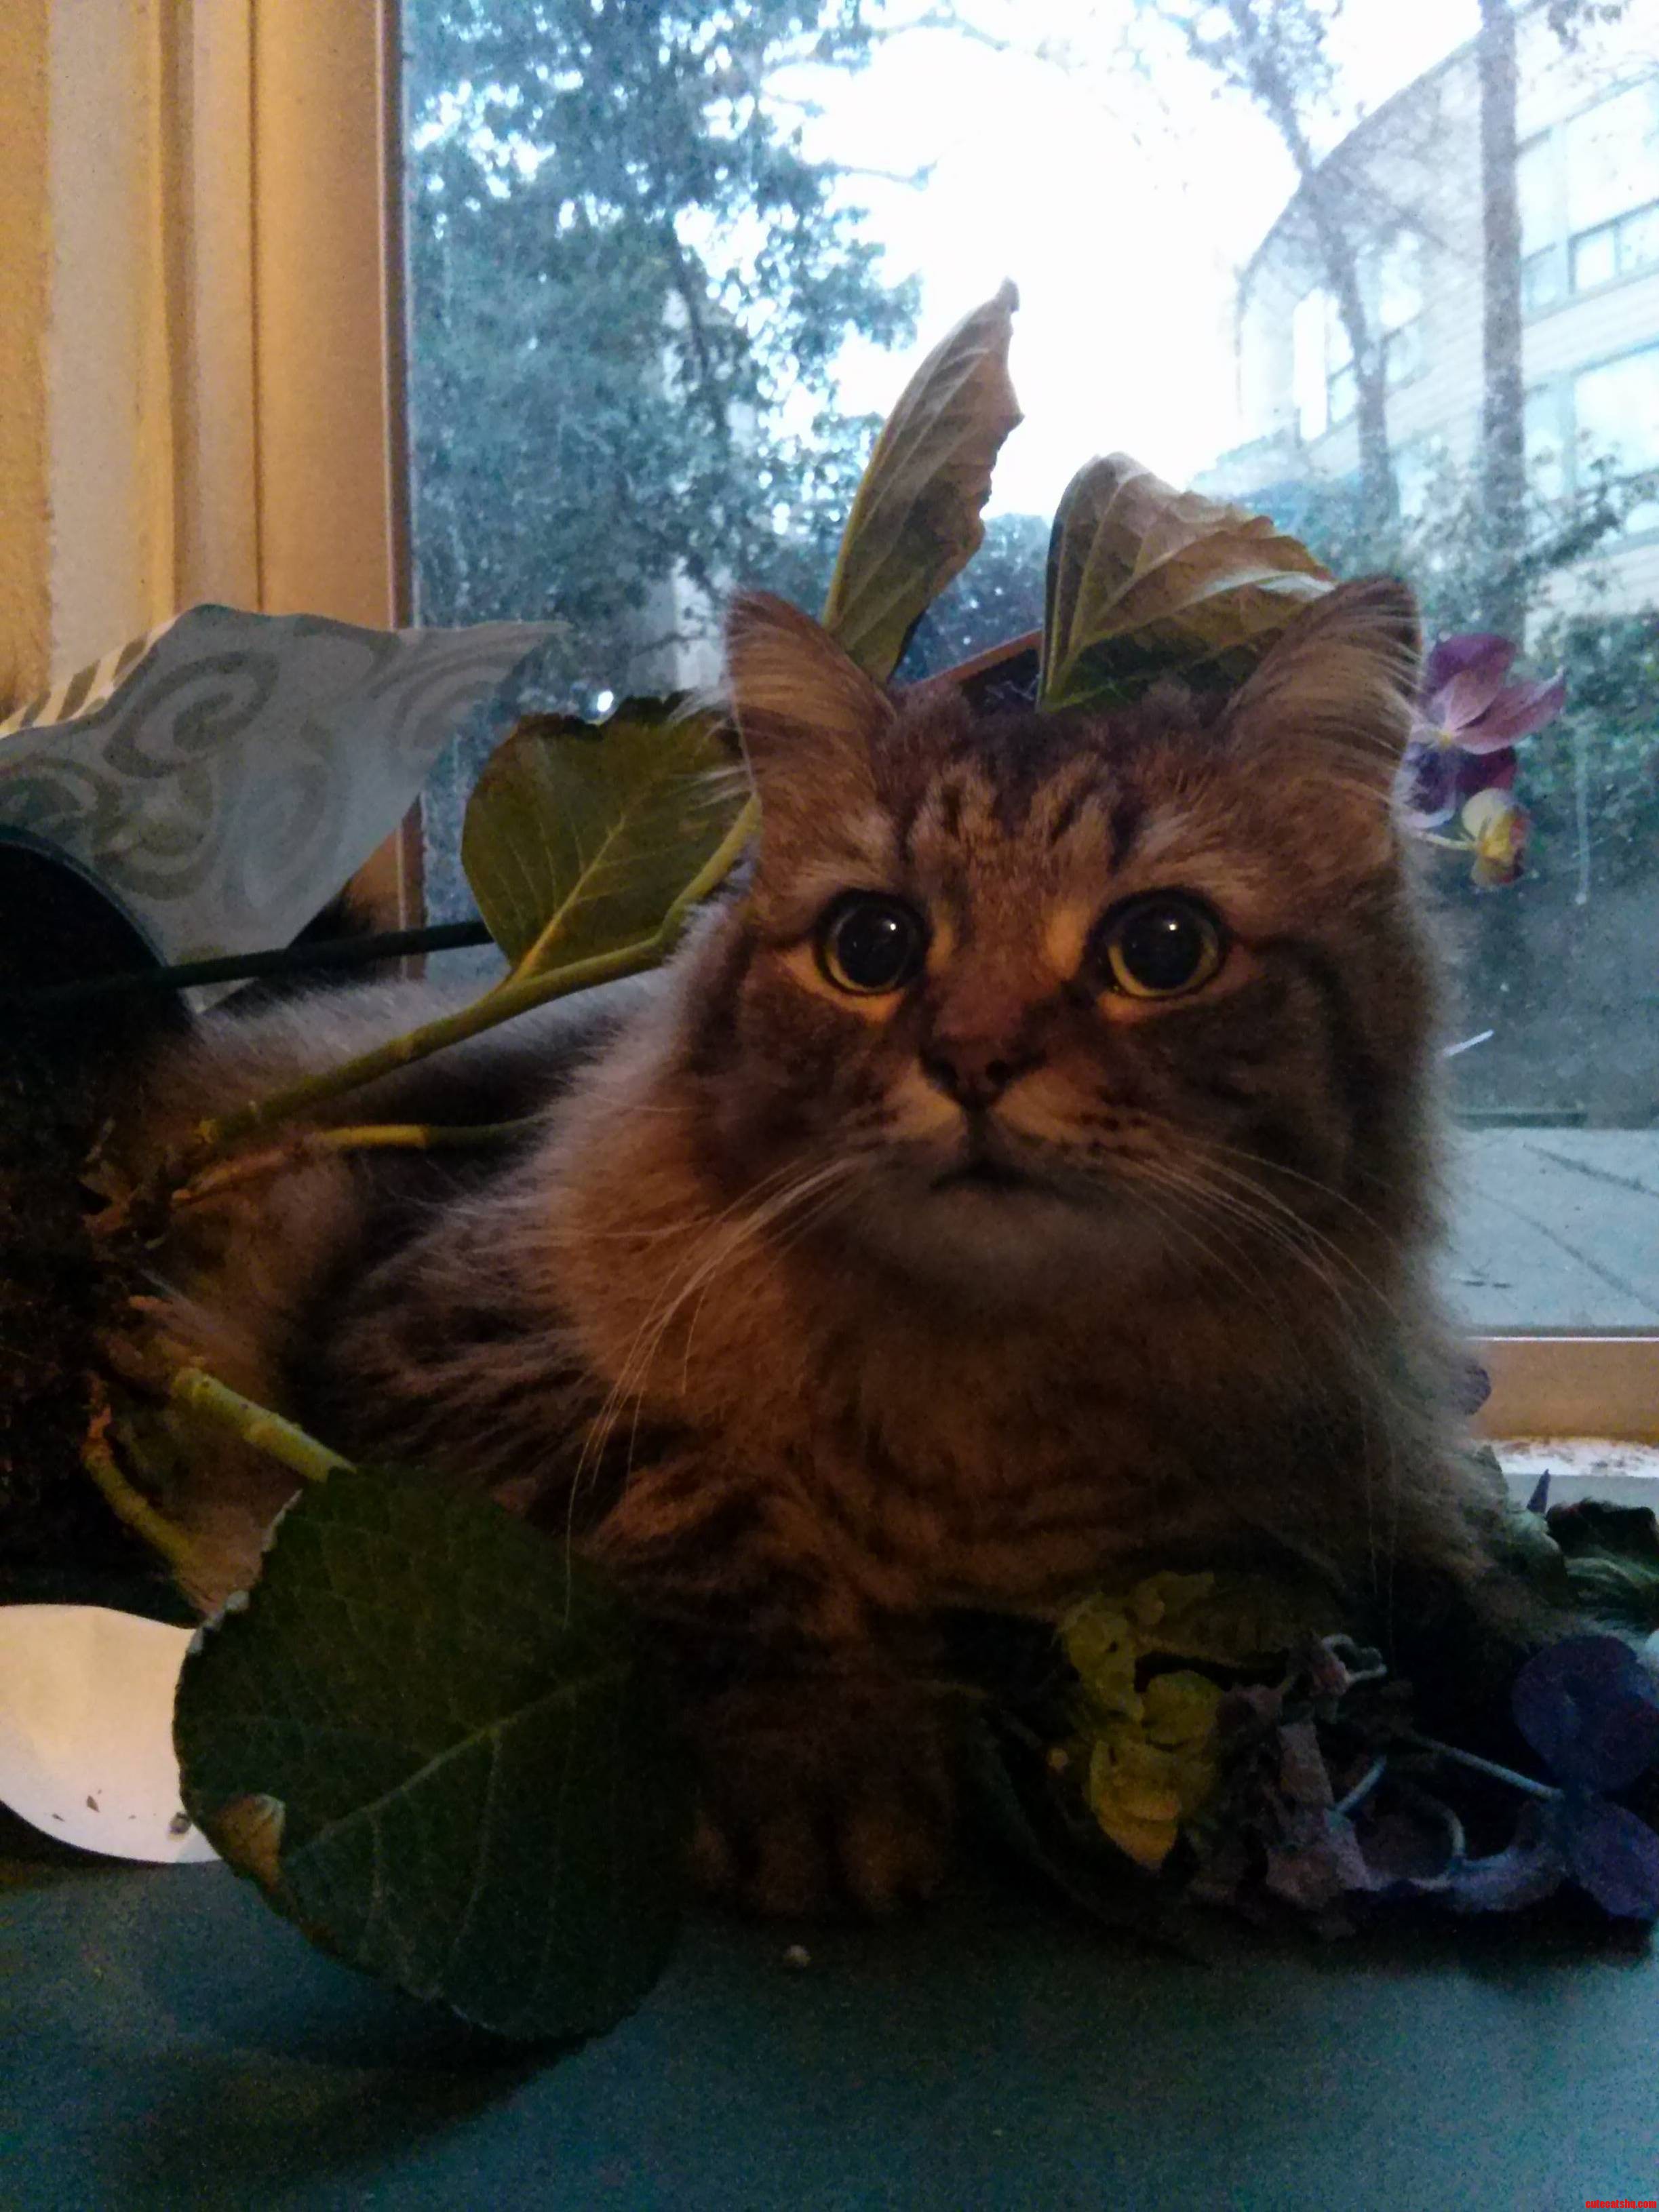 He Really Likes This Plant.